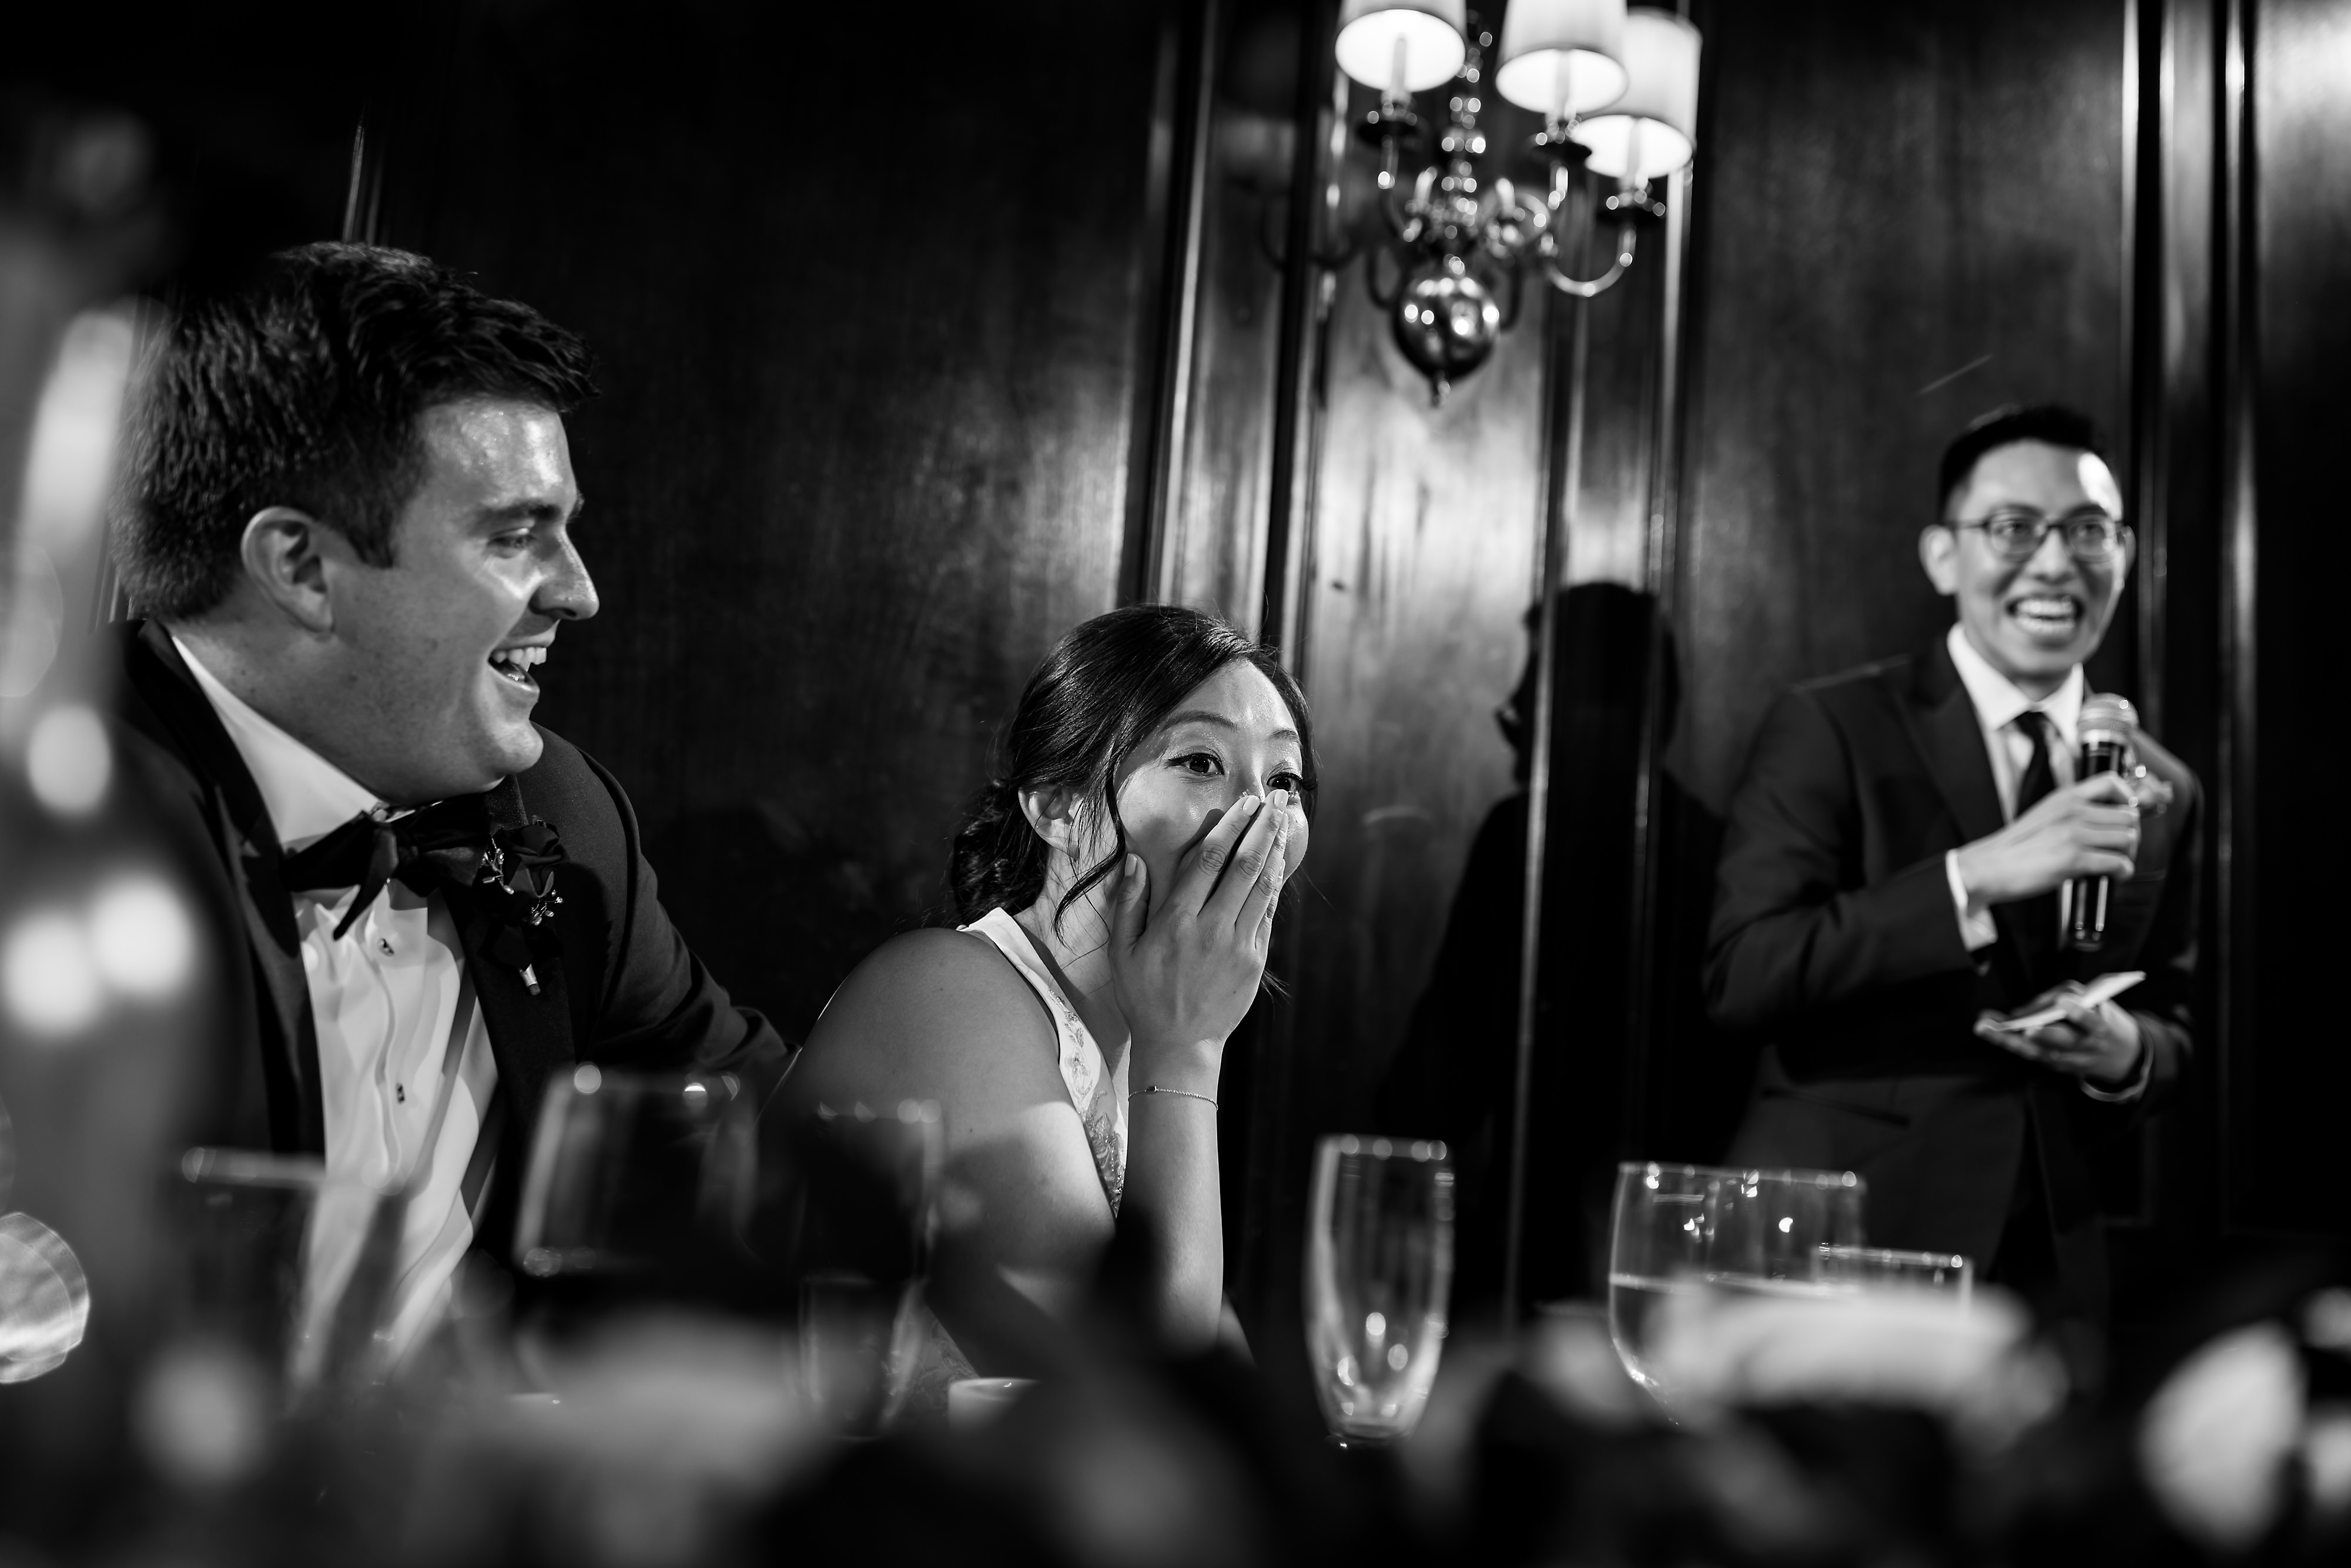 brother gives toast during wedding reception at Salvatore's